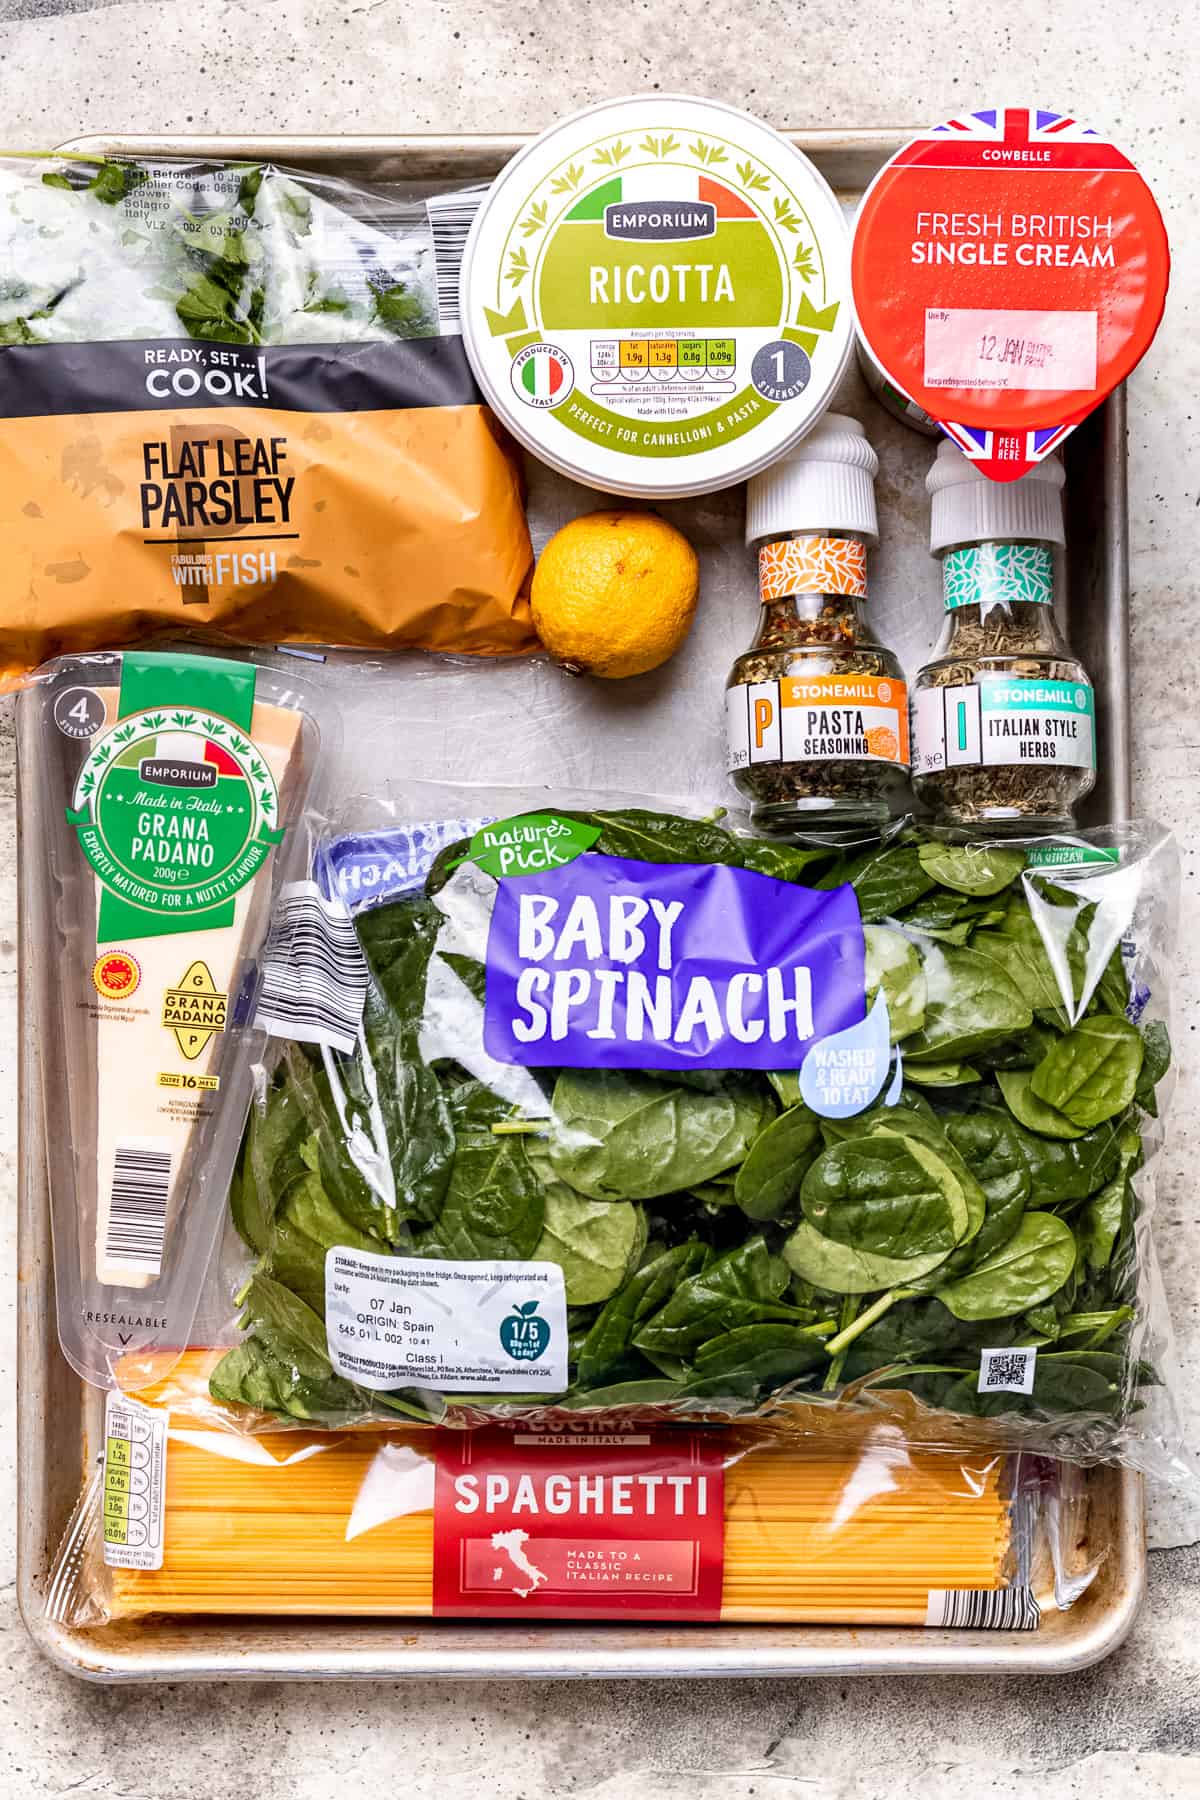 Ingredients for spinach and ricotta pasta.